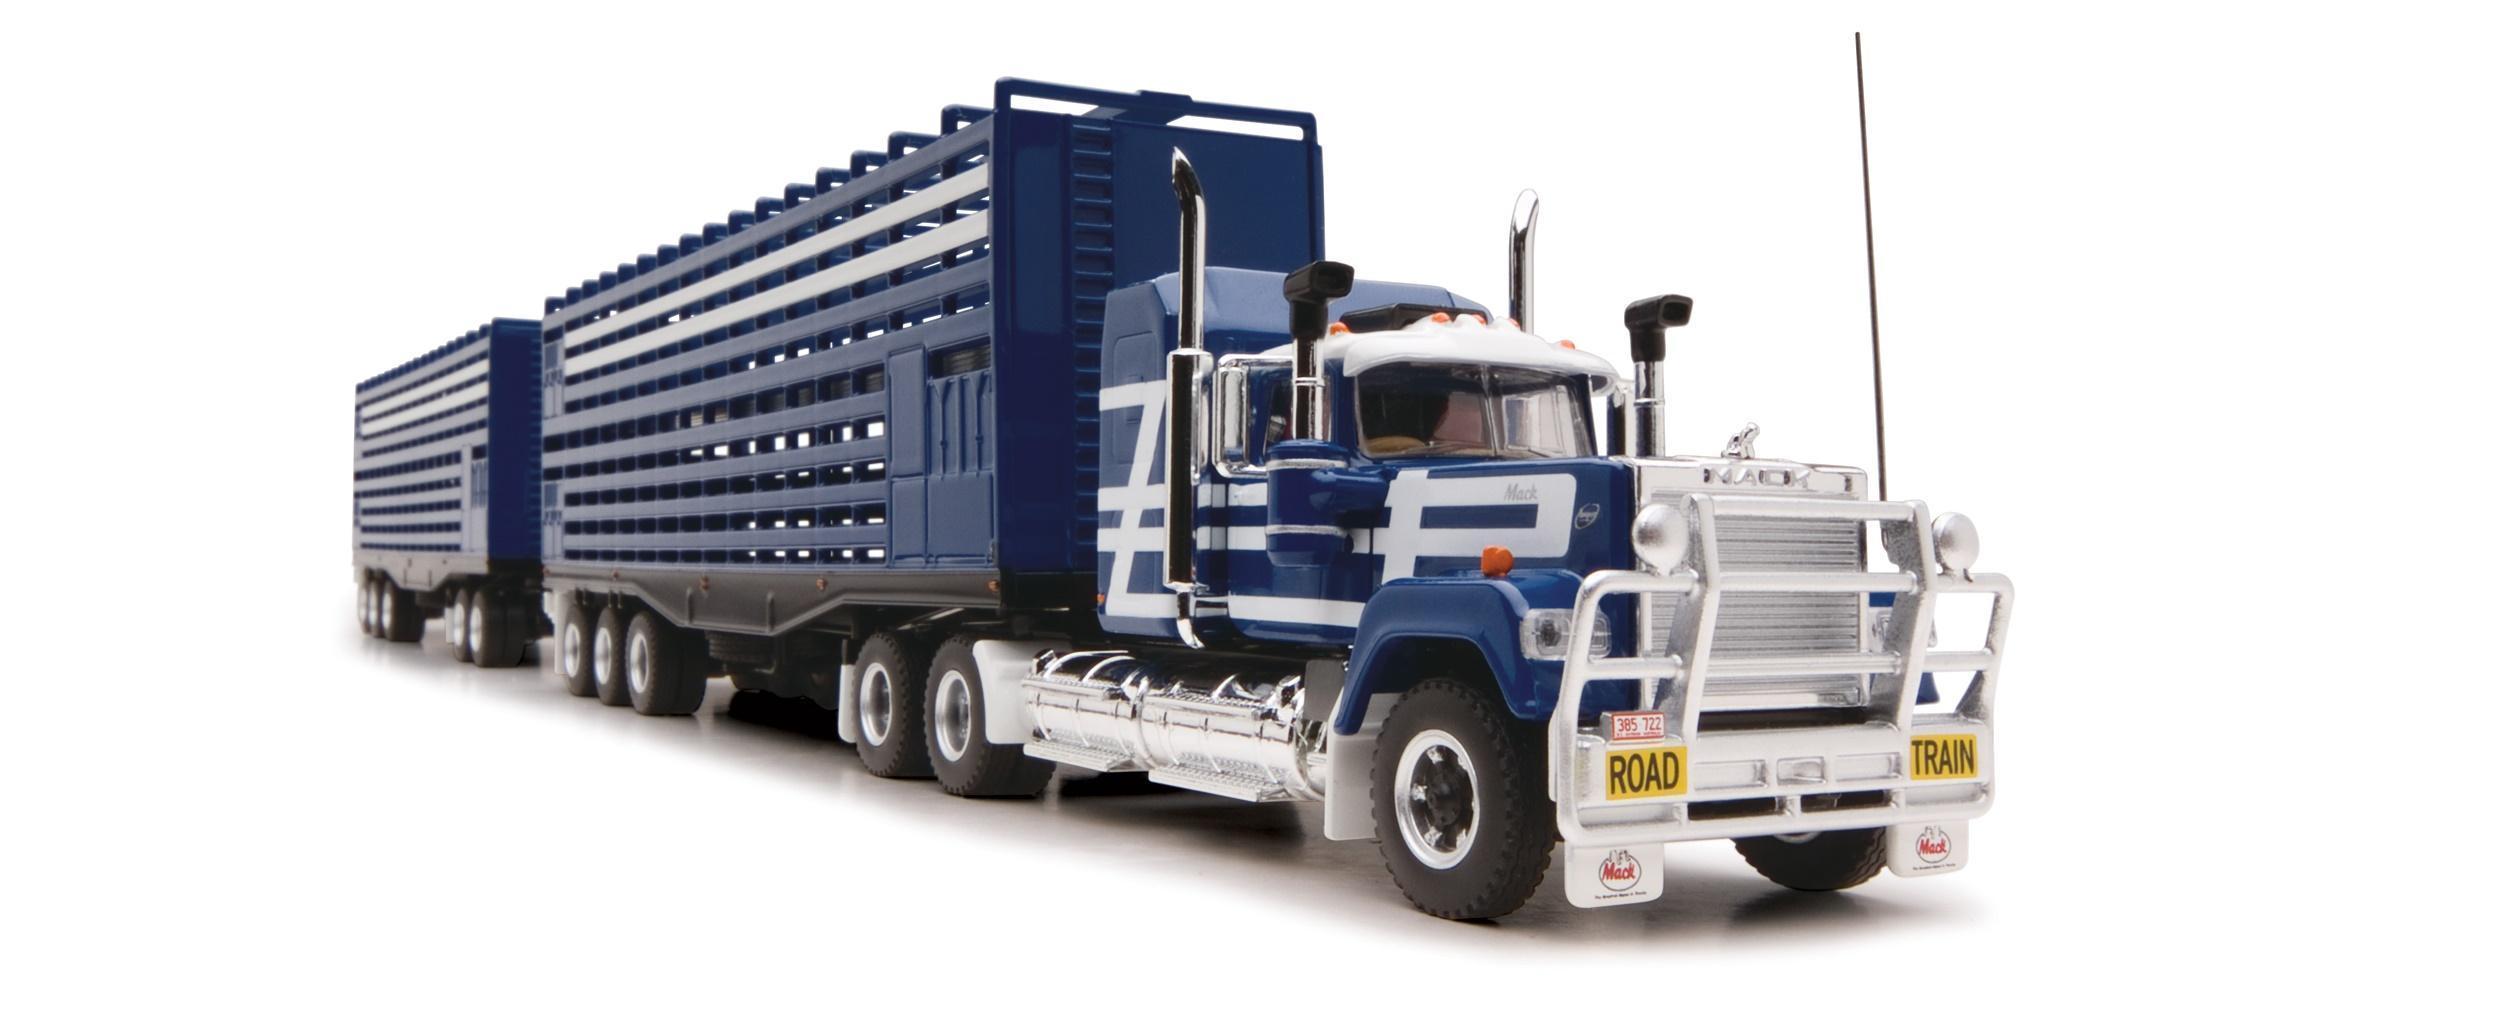 PRE ORDER - Highway Replicas Livestock Mack Road Train Blue & White Die Cast Model Truck With Additional Trailer & Dolly 1:64